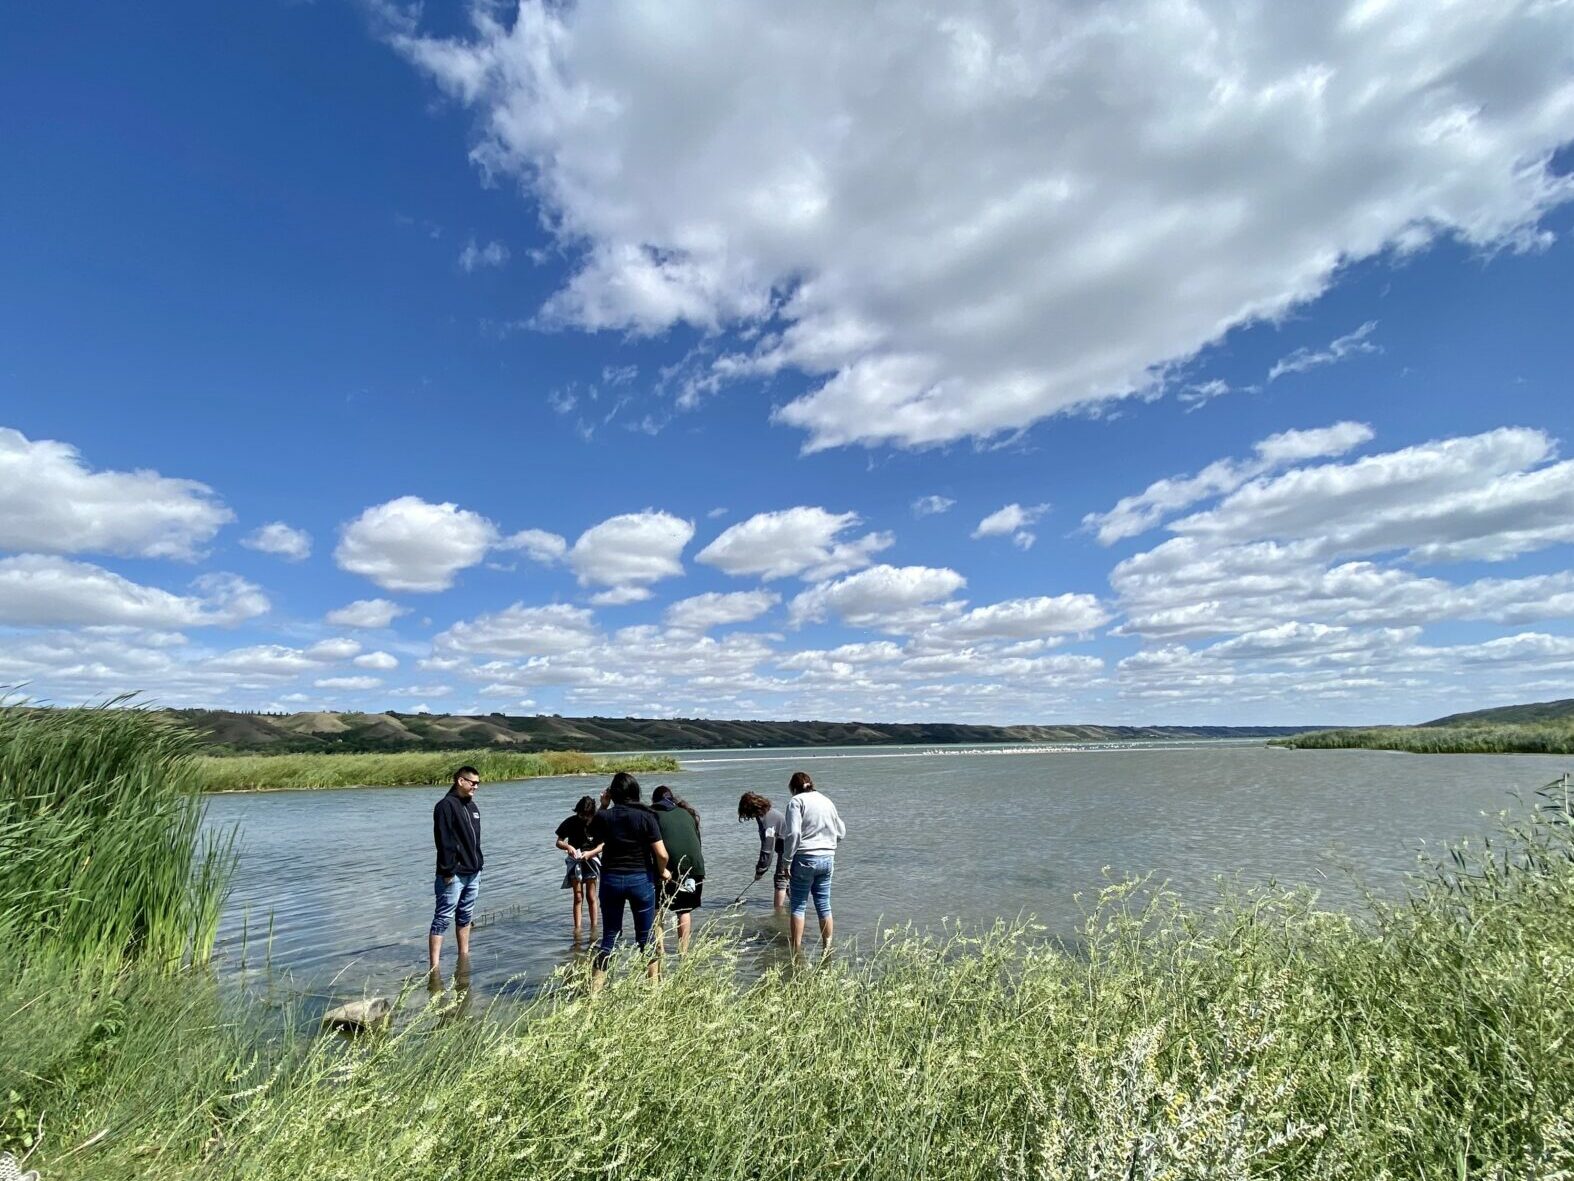 A group of youth are seen testing the water at an inlet of a River in Saskatchewan.